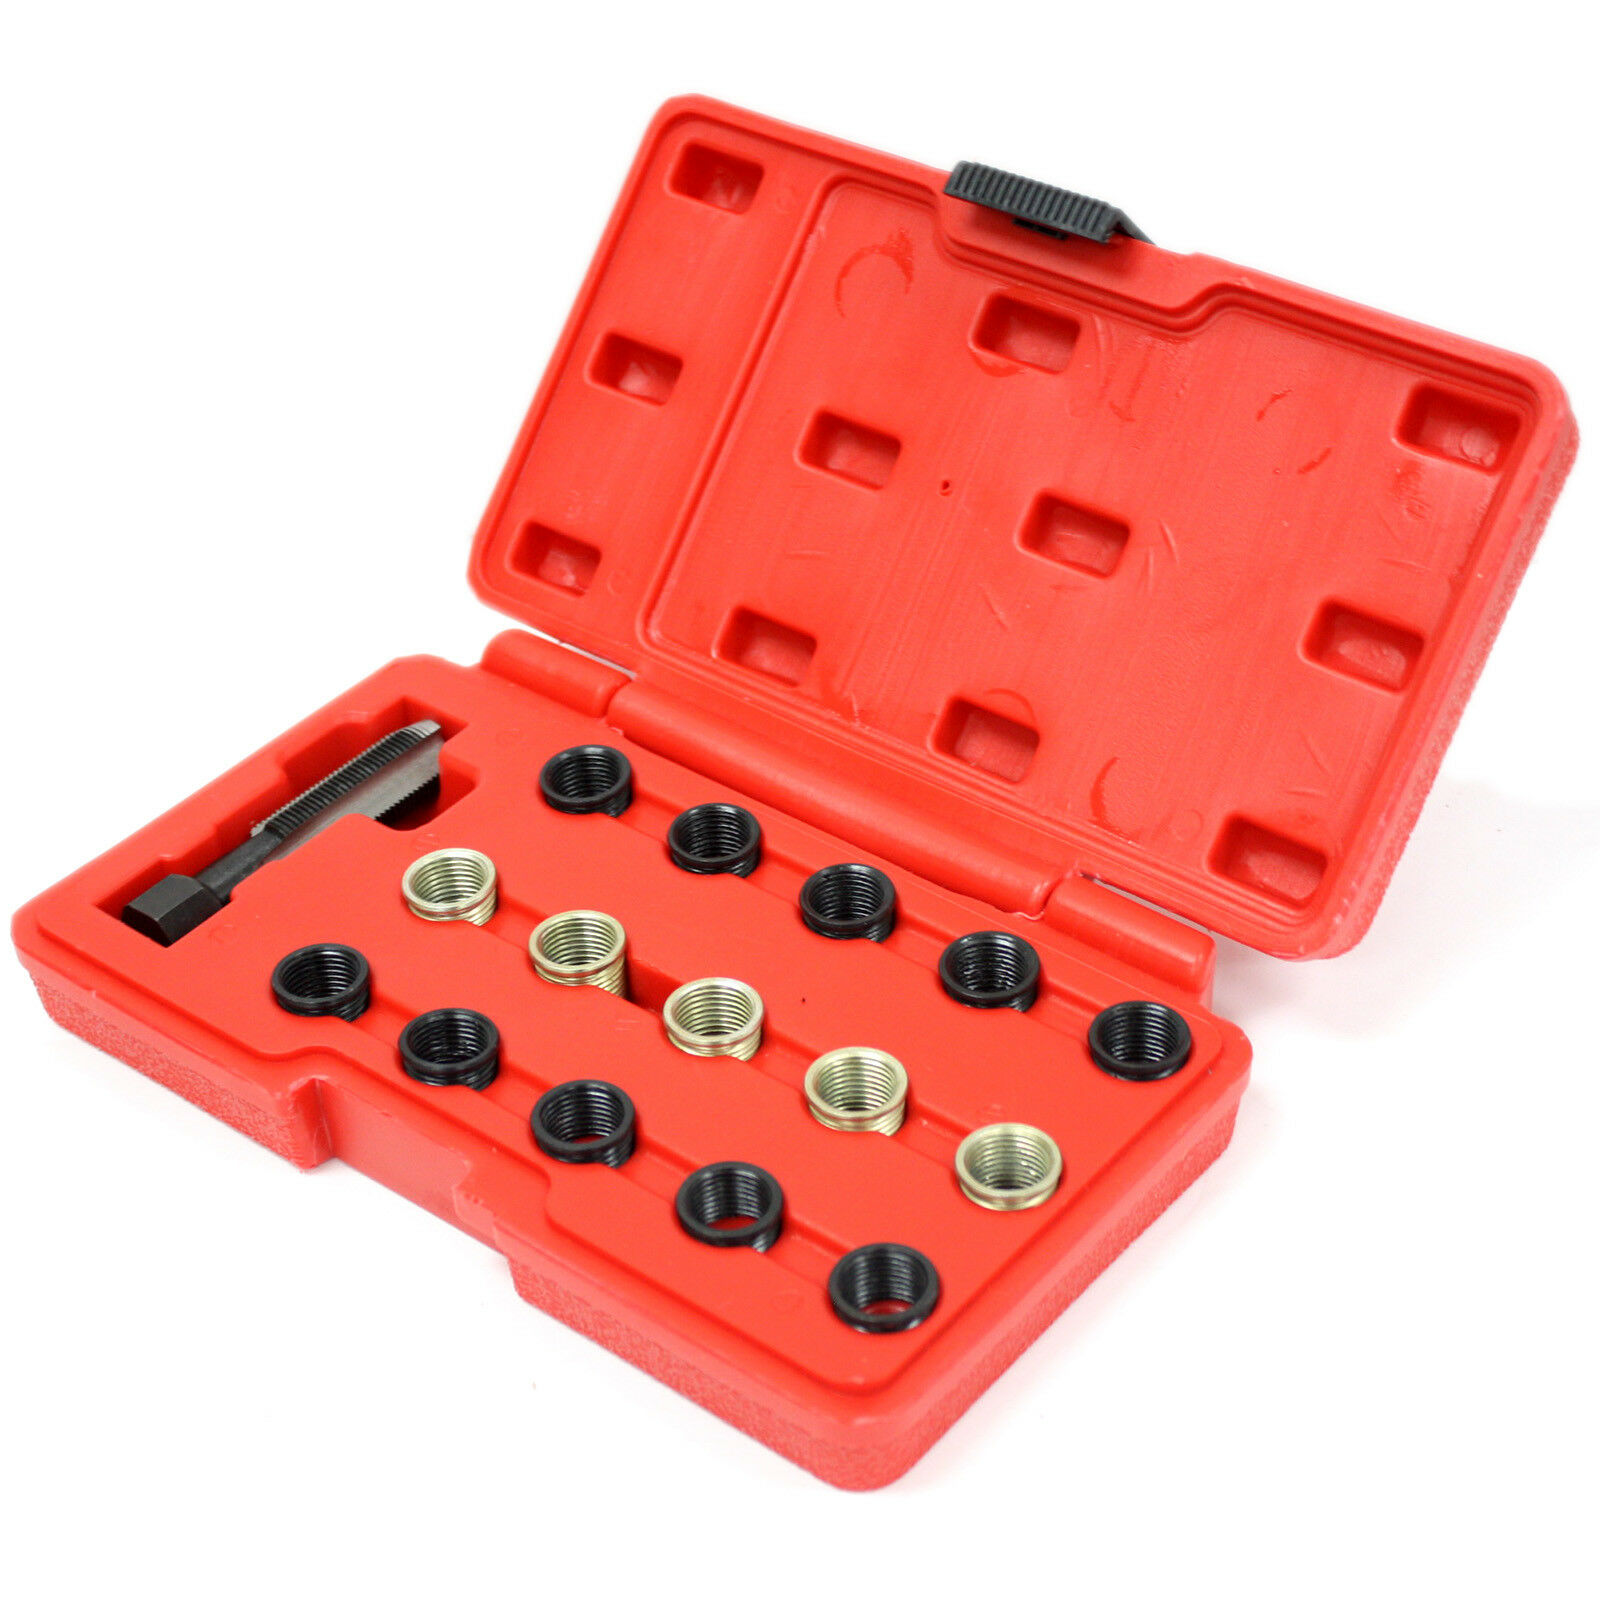 16Pcs Spark Plug Screw Tap and Screw Thread Repair Tools Rethreading Kit with Portable Case for Auto Part Repair Ejoyous Spark Plug Repair Kit 